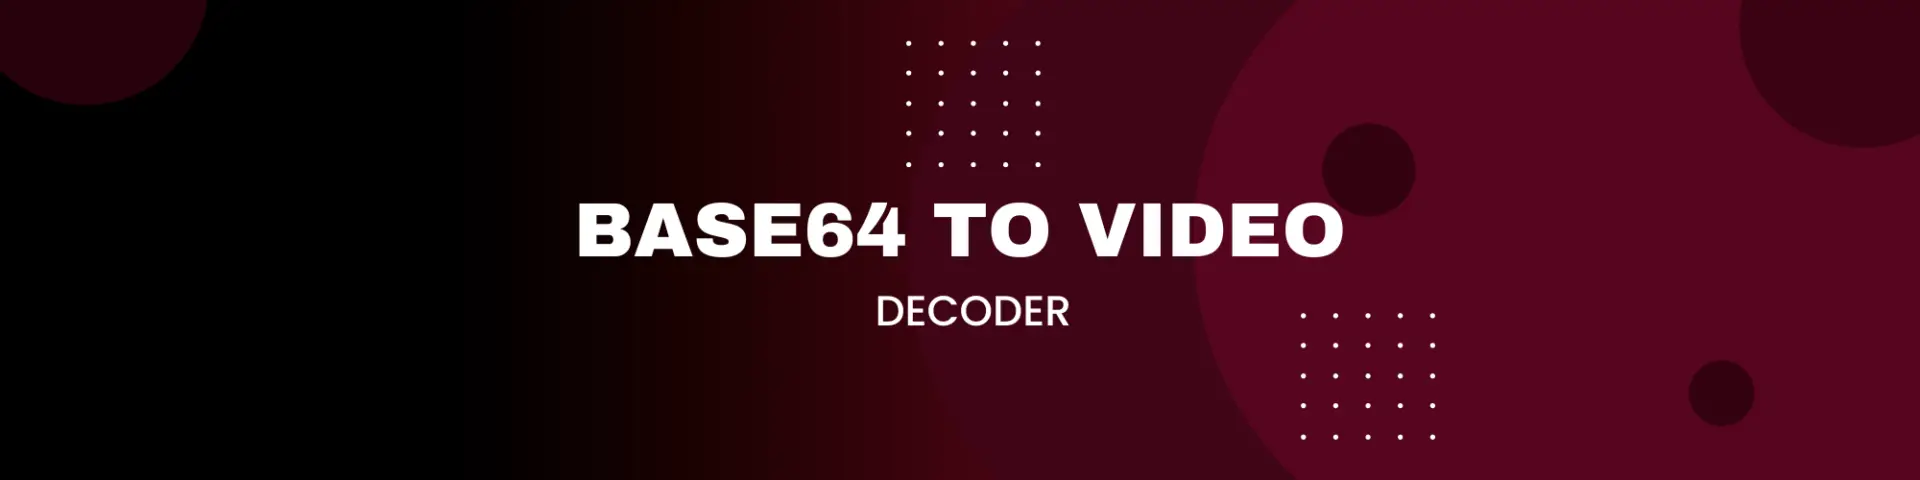 Base64 to Video Decoder: Convert Base64 to Video